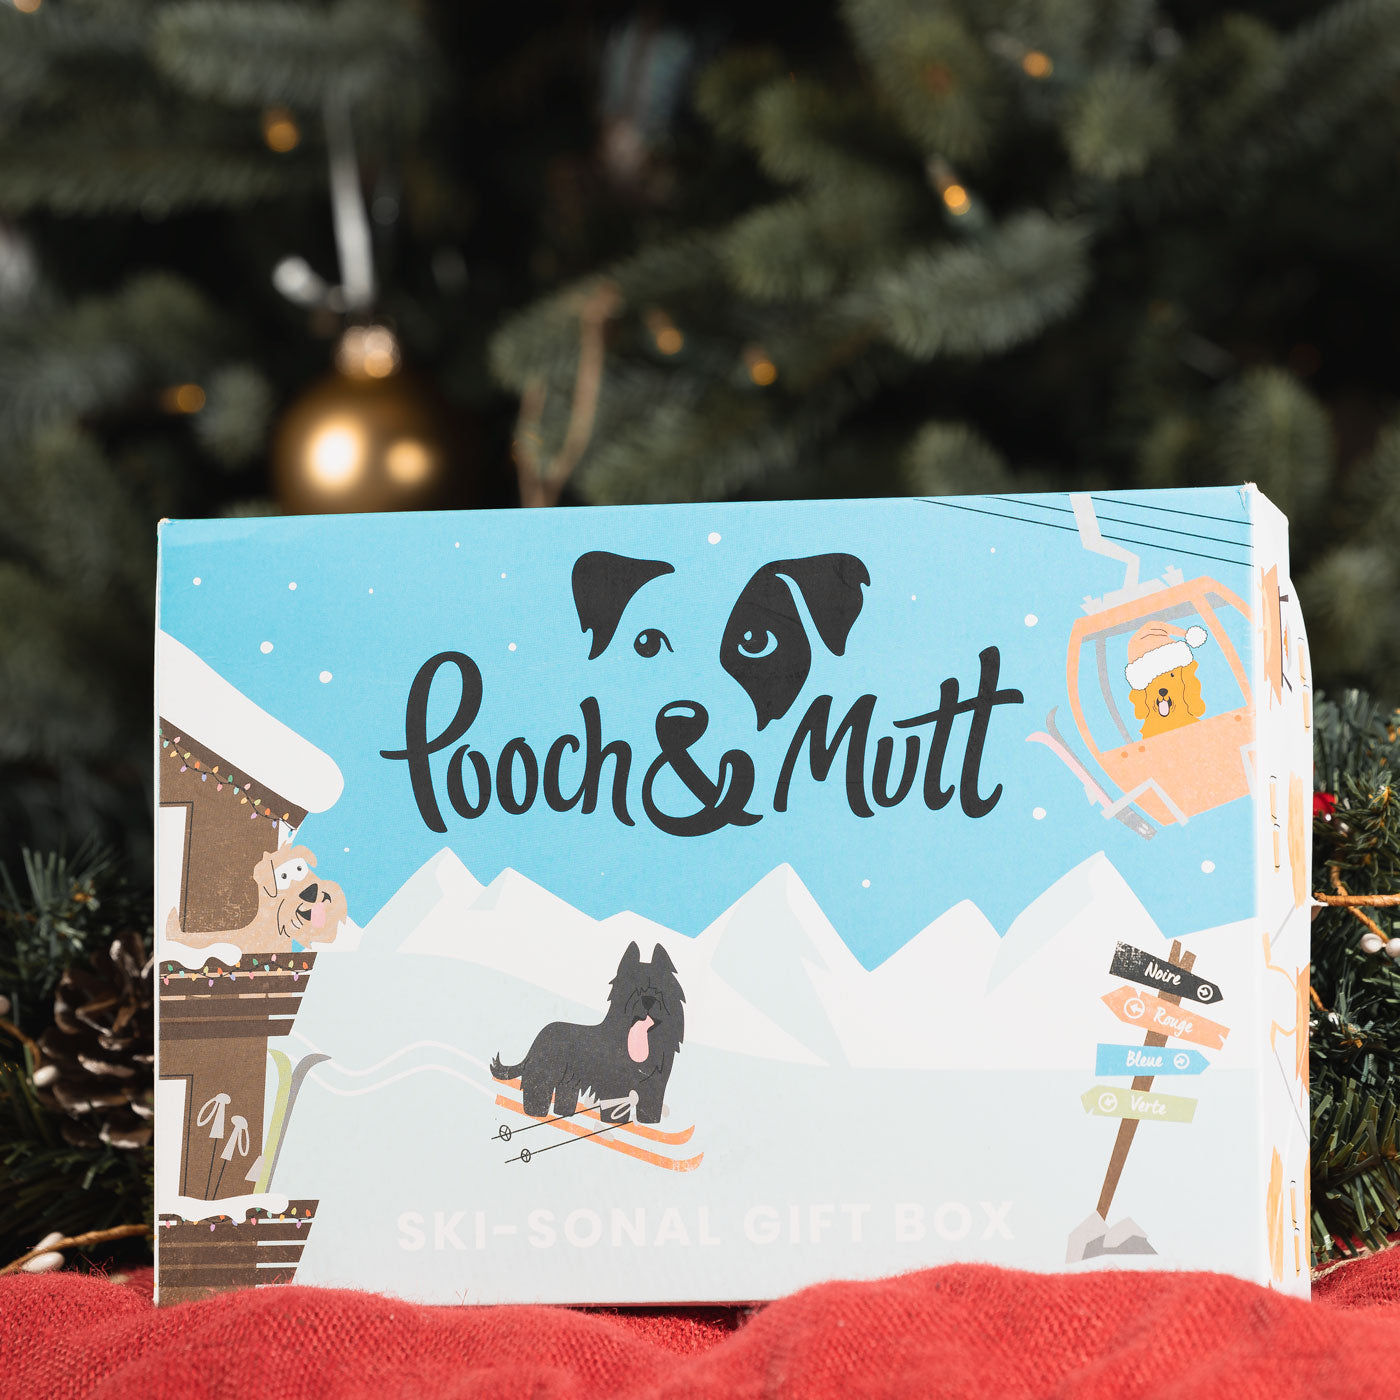 Pooch & Mutt Skisonal Christmas Gift Box For Dogs, Available Now at Lords & Labradors